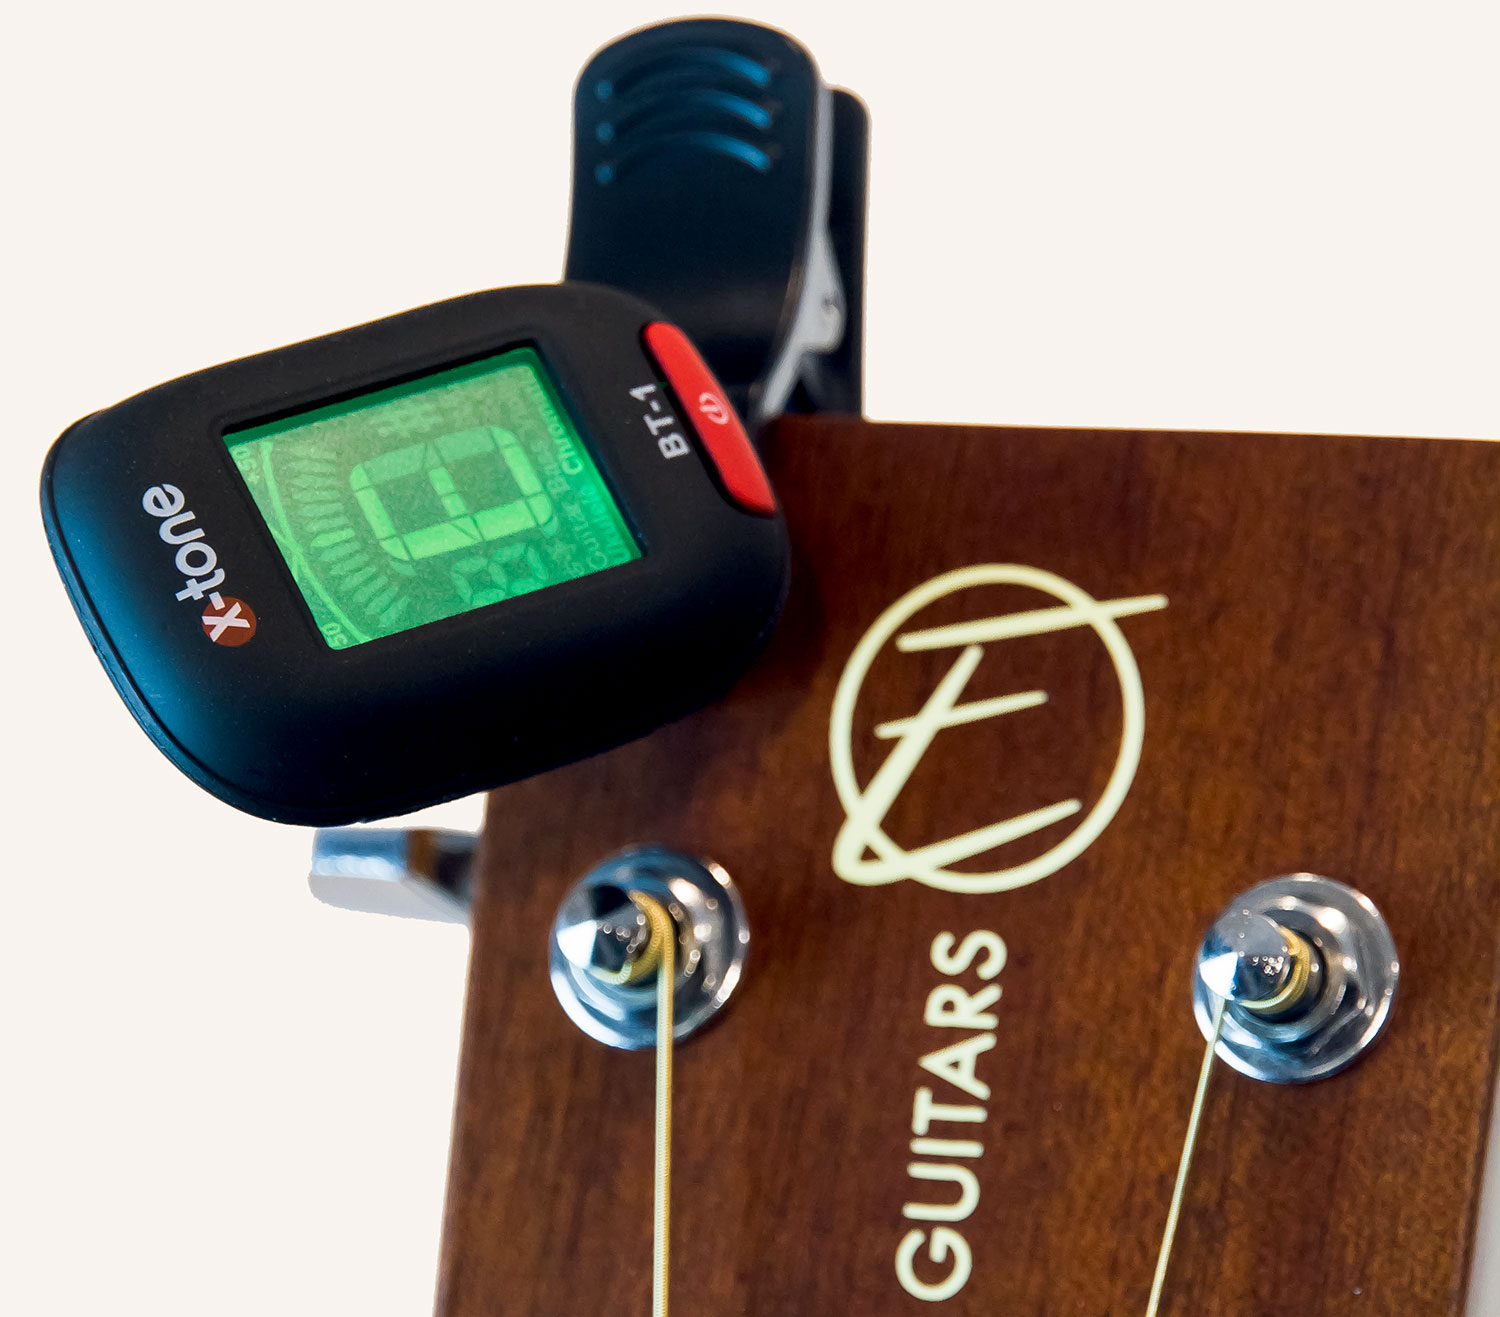 X-tone 3110 Clip-on Tuner Pince - Guitar tuner - Variation 6